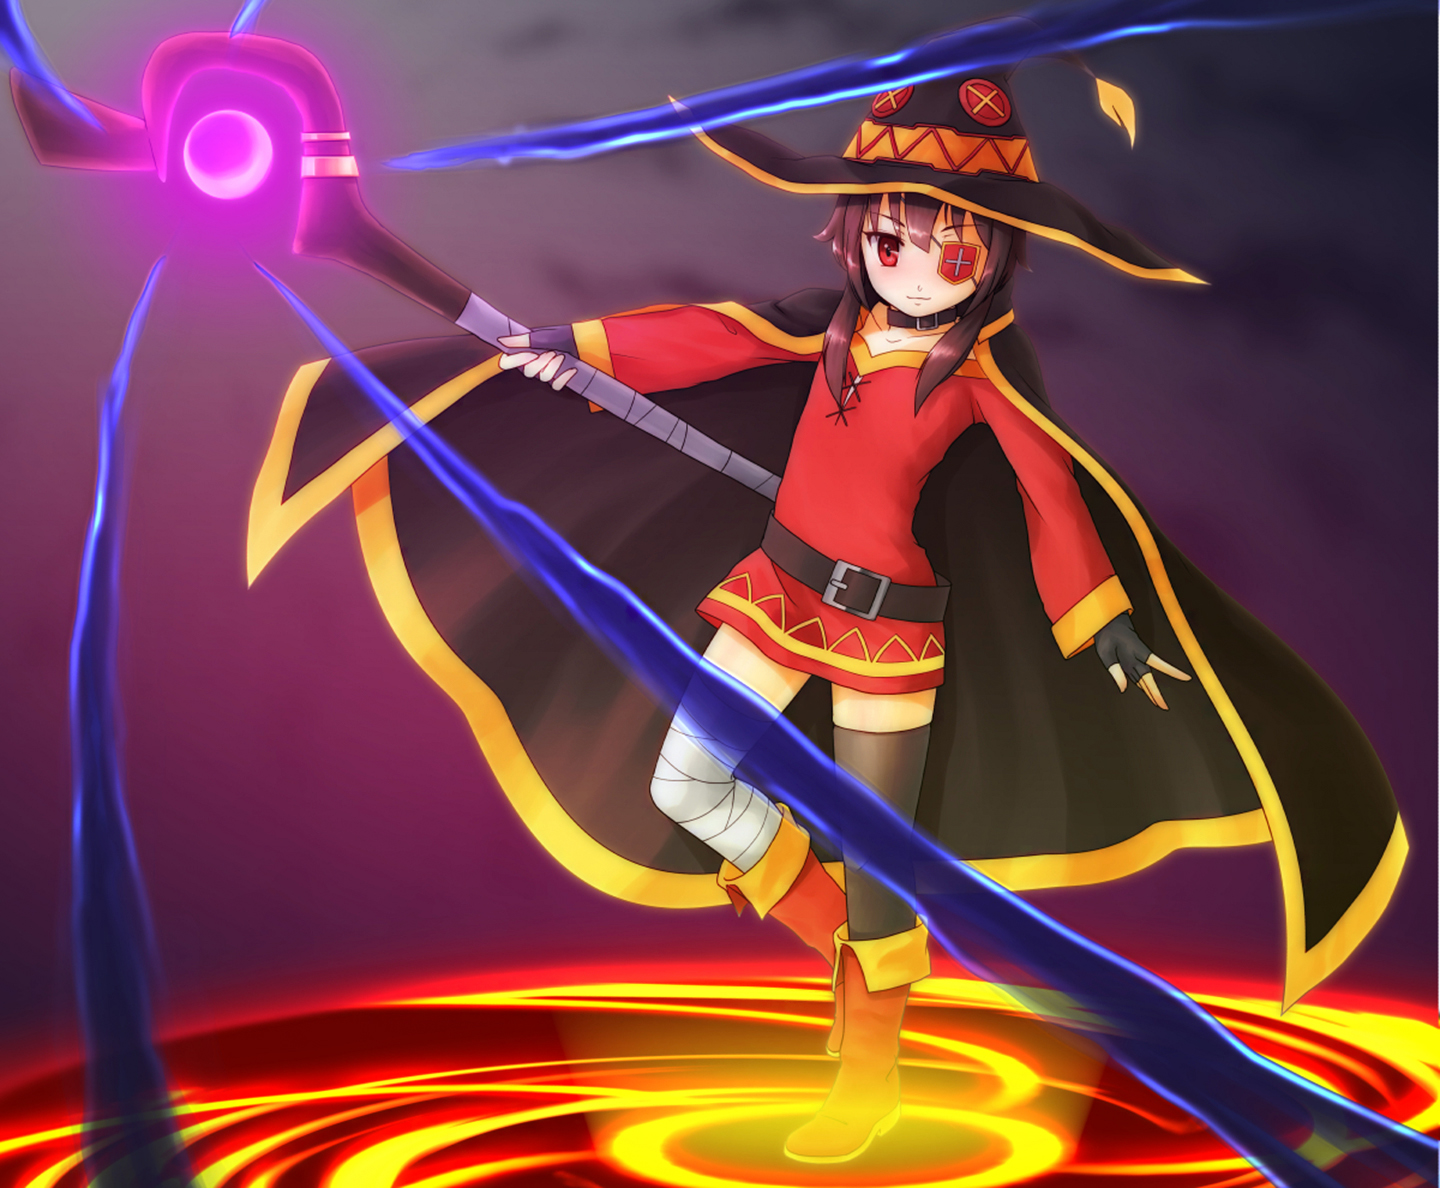 Megumin by 342 (Pixiv)